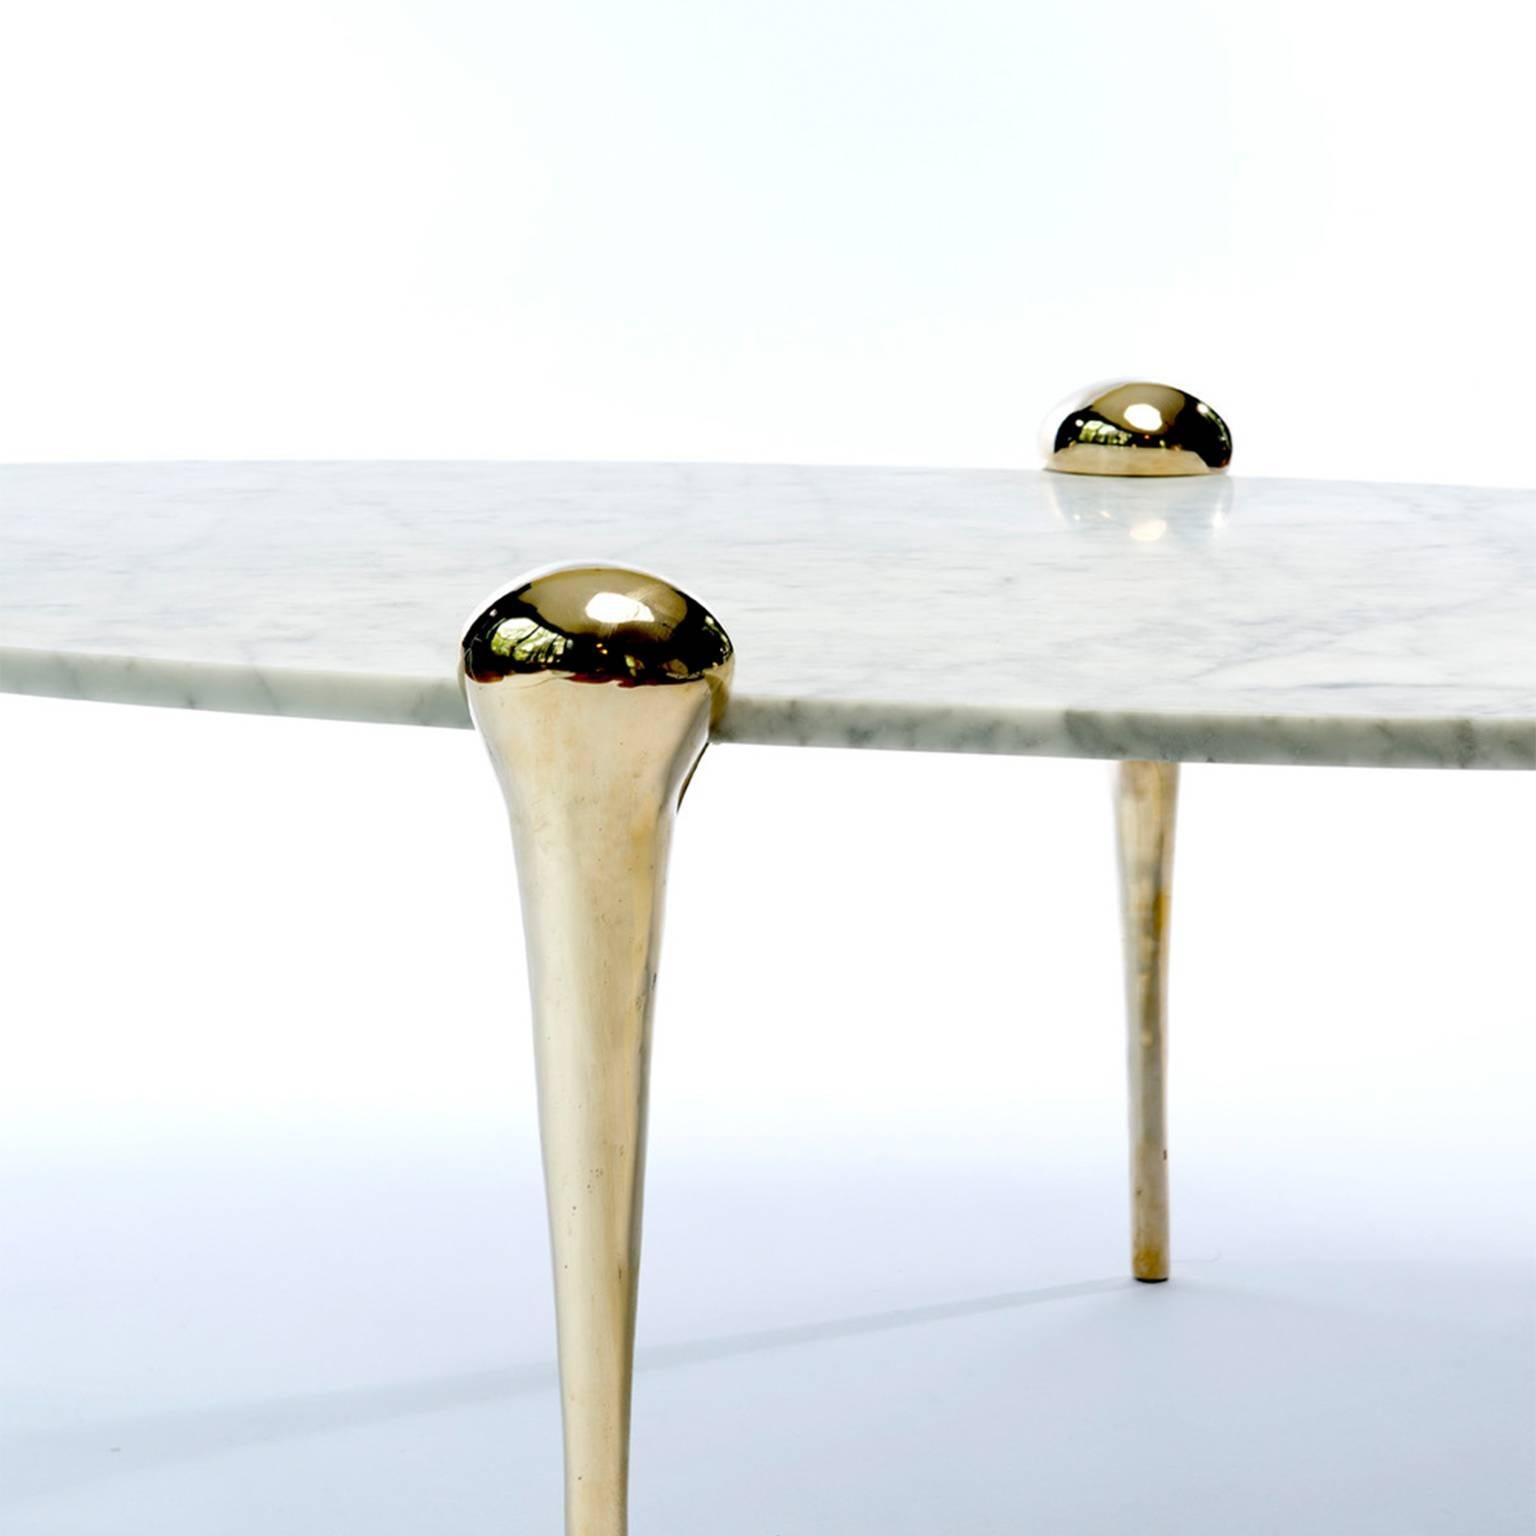 marble and bronze coffee table